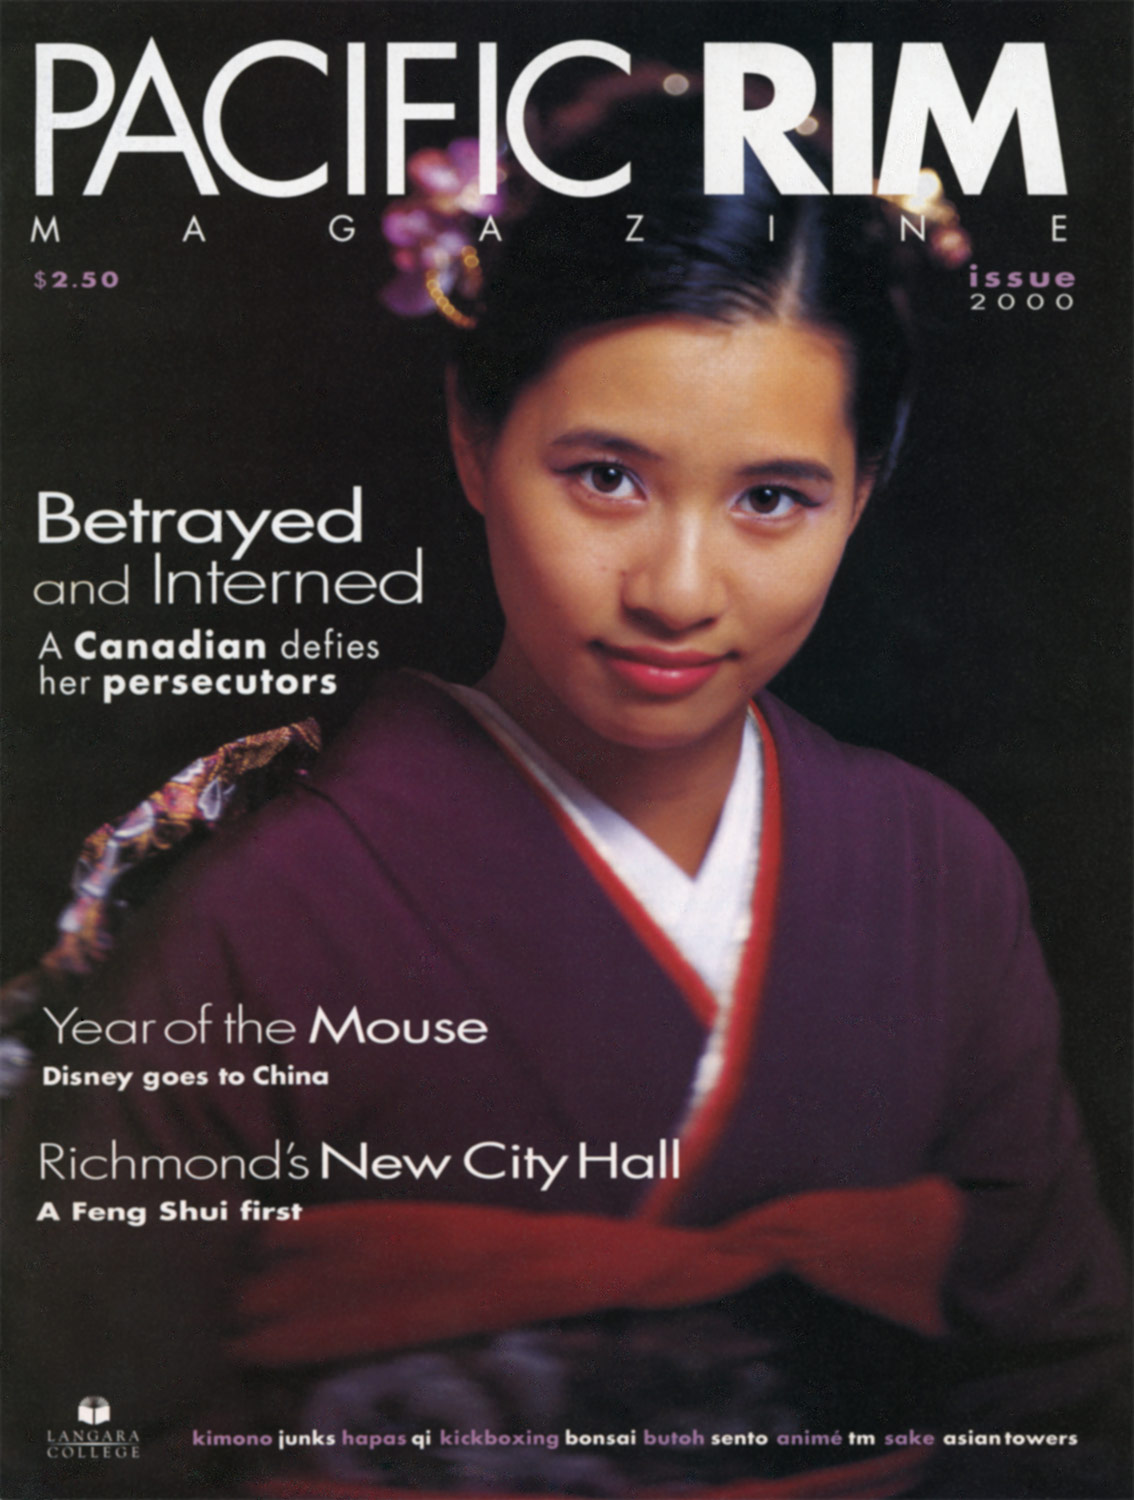 2000 Pacific Rim Cover. Image of woman in traditional Japanese dress.